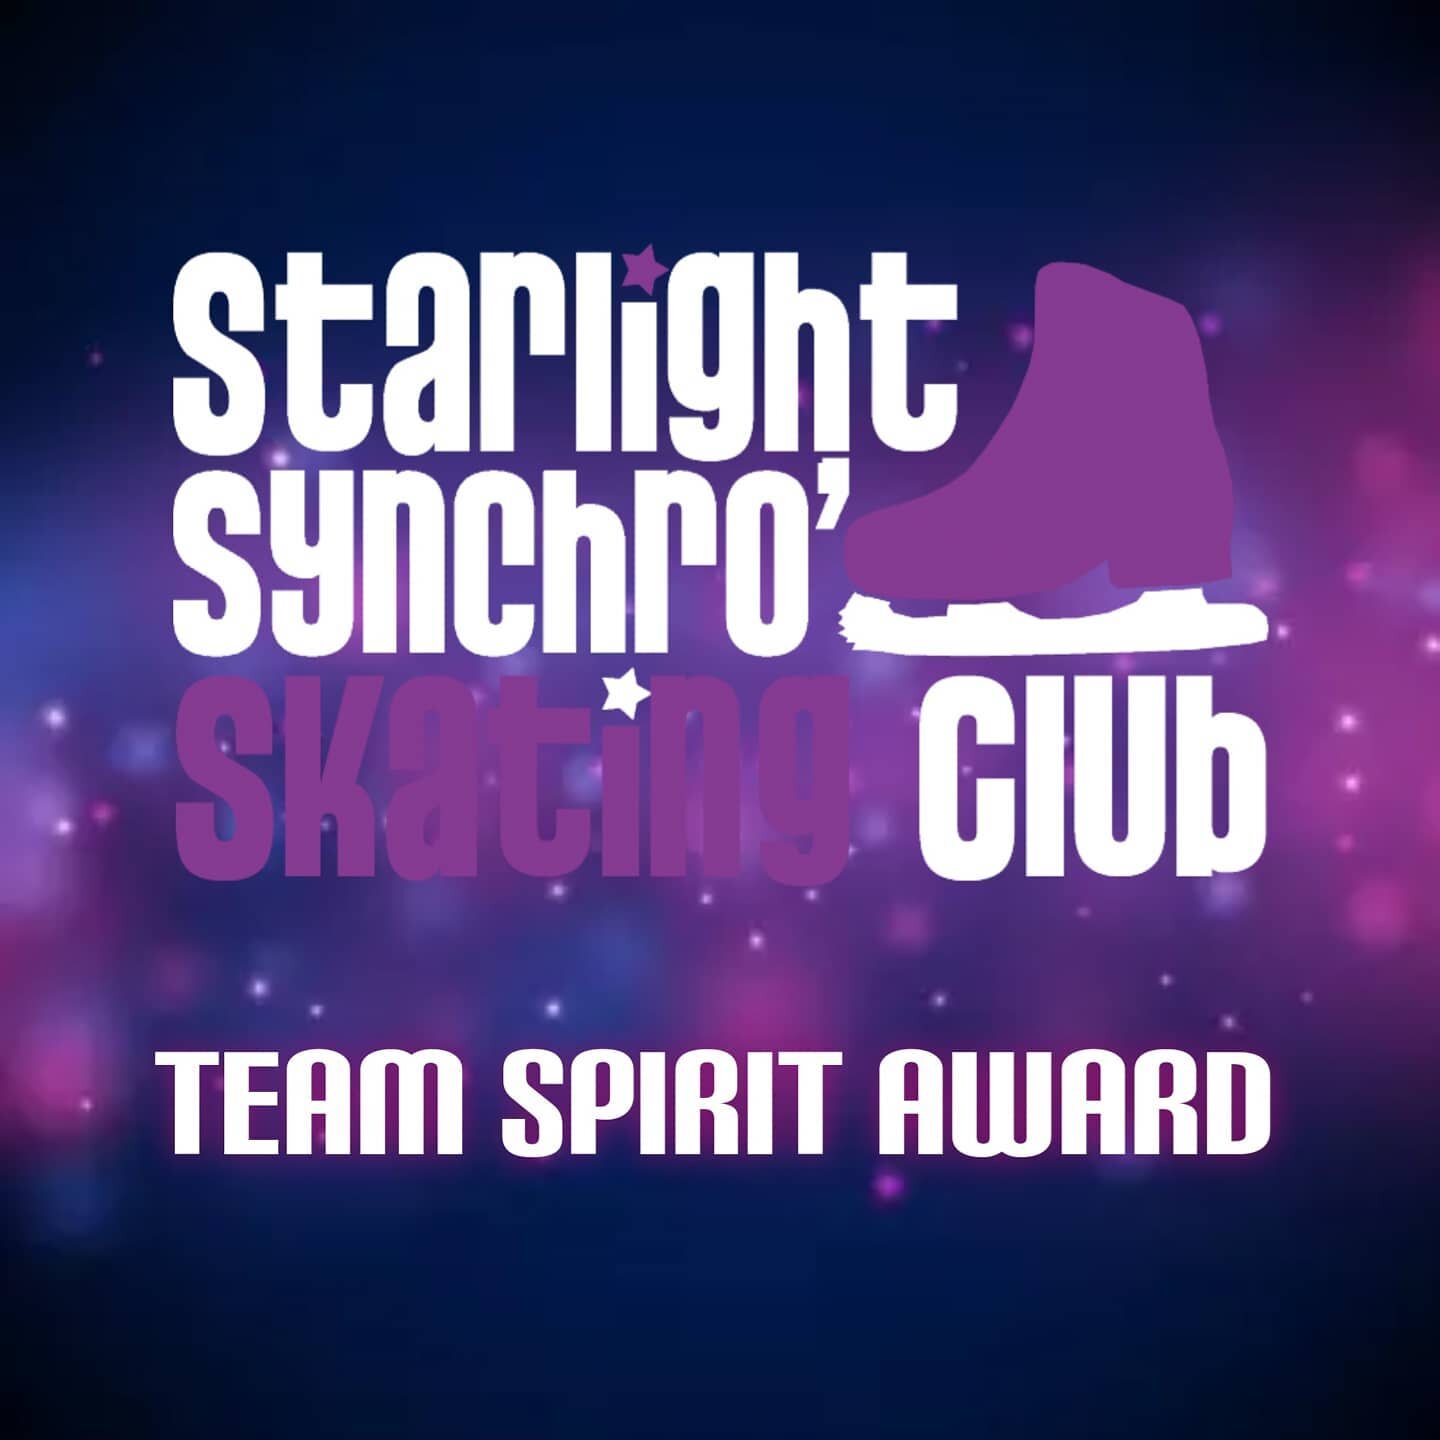 ✨ TEAM SPIRIT ✨
.
The following Starlight skaters have been awarded the &quot;Team Spirit&quot; award for the positivity and growth-mindset they bring to each training session.
.
These skaters can often be found encouraging teammates during training 